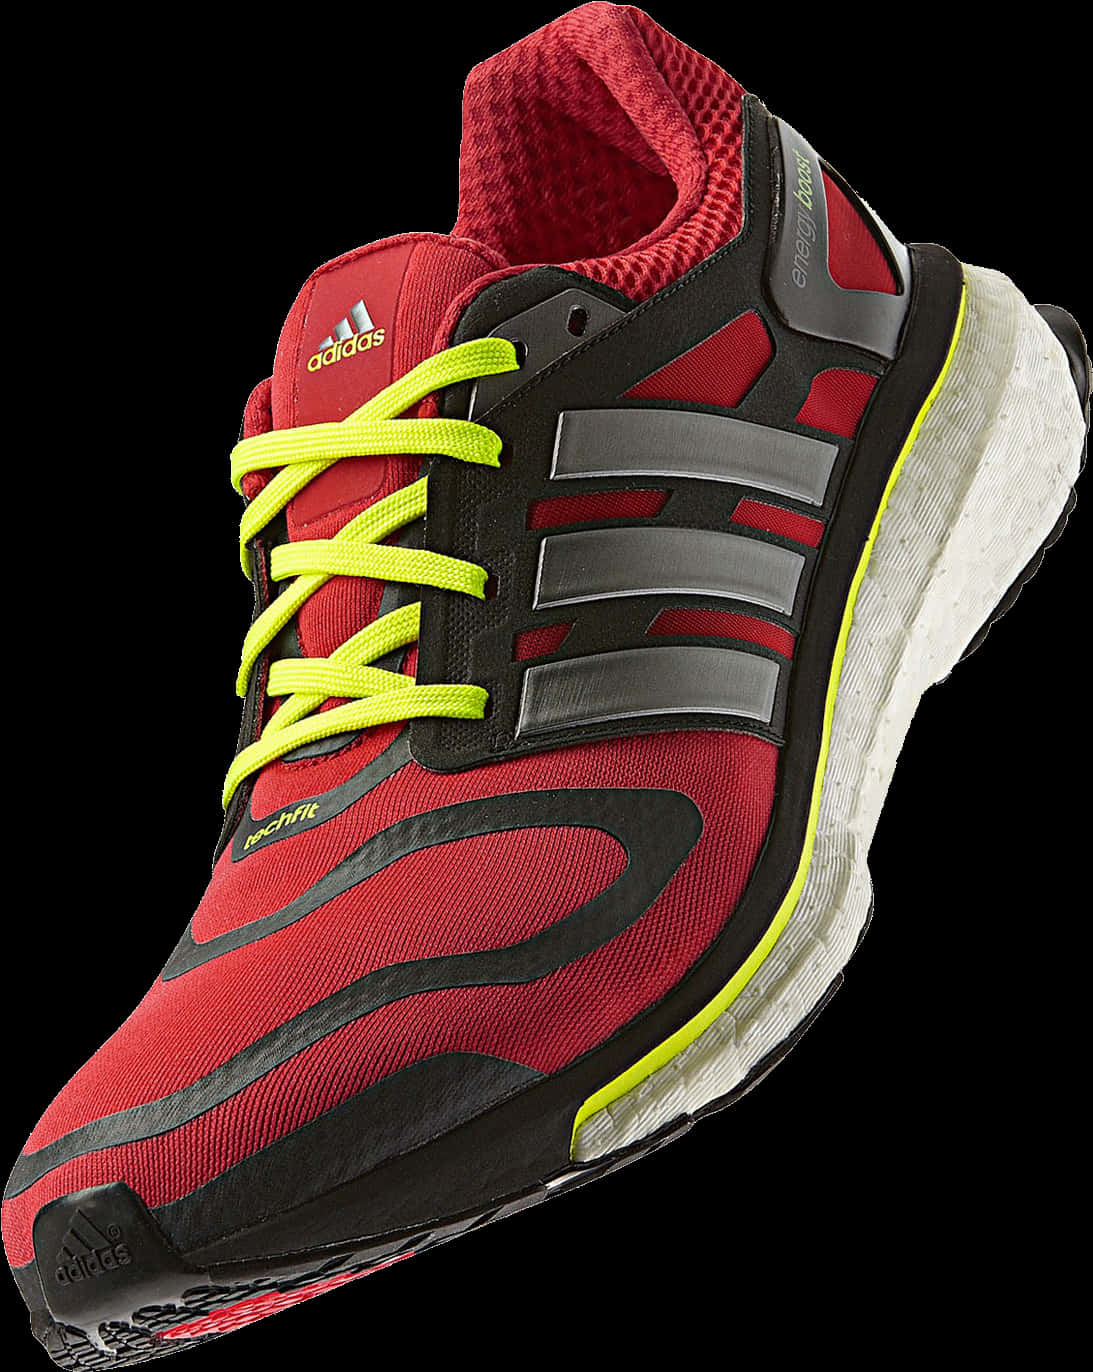 Download Red Black Adidas Running Shoe | Wallpapers.com